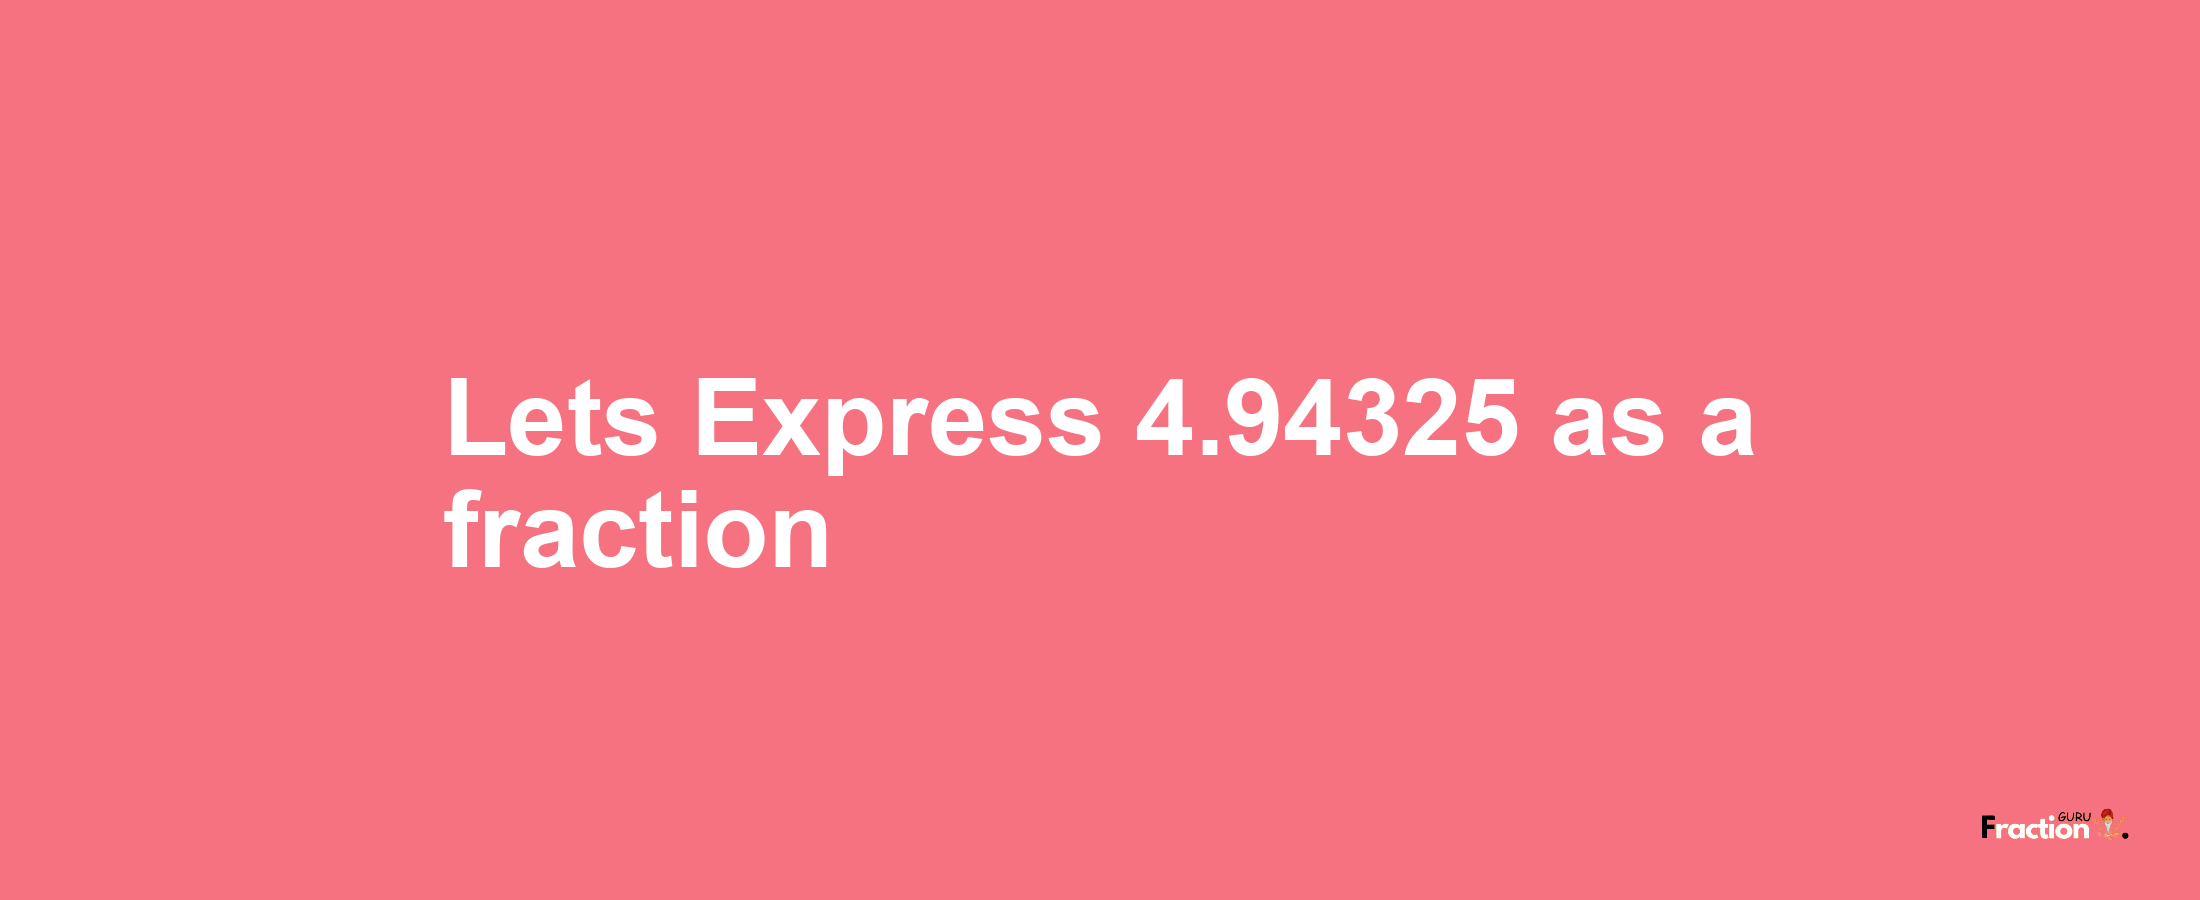 Lets Express 4.94325 as afraction